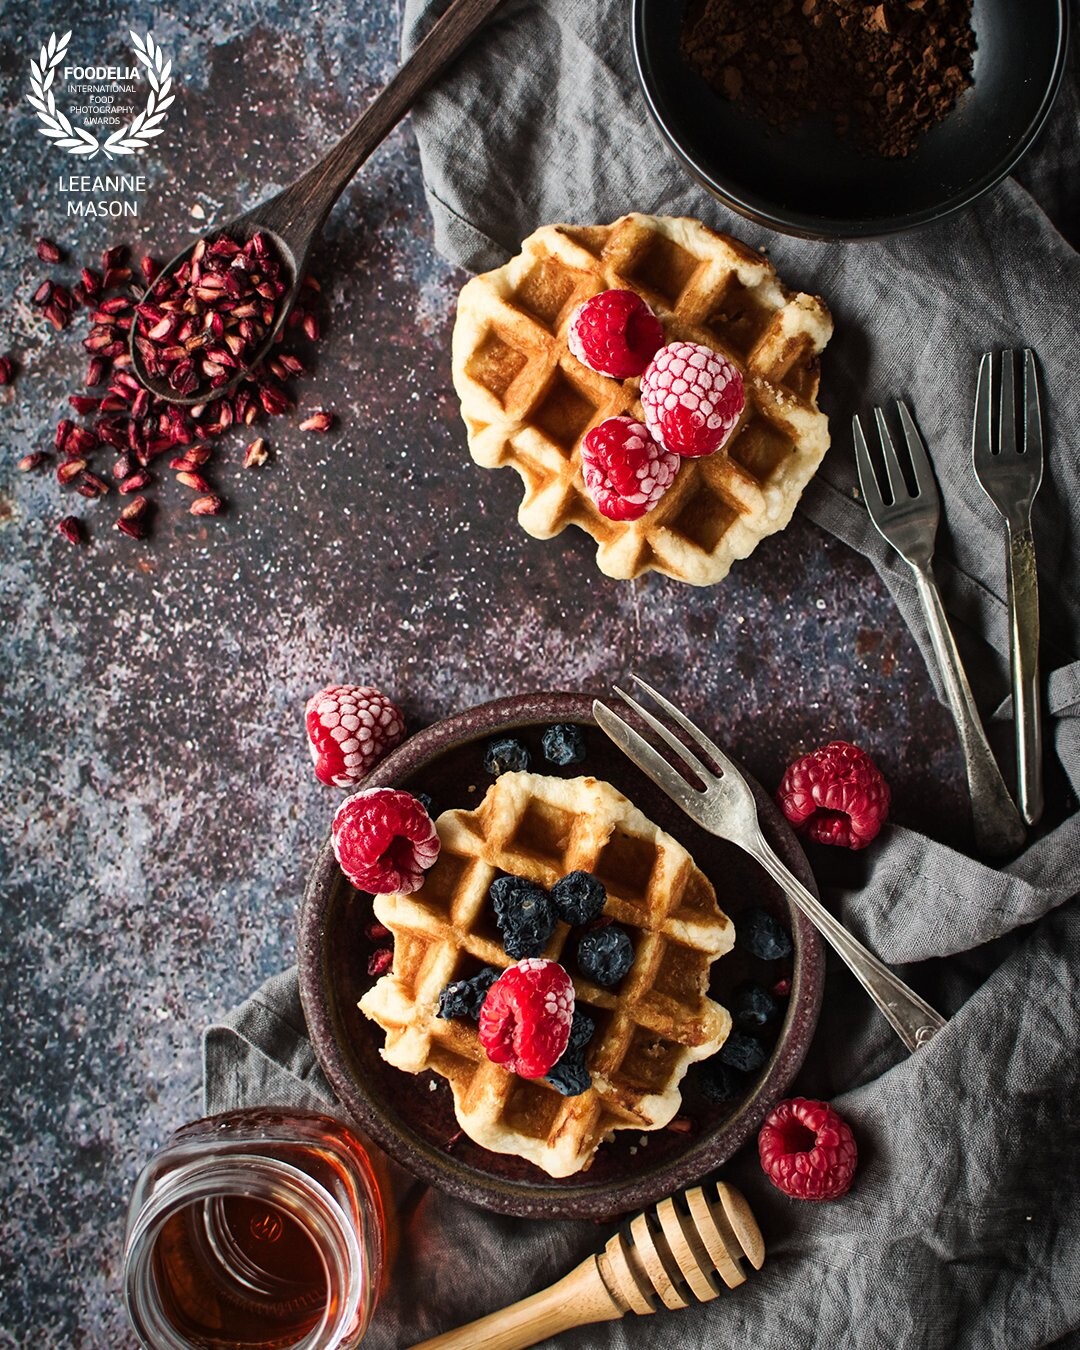 Delicious waffles with pomegranate seeds, berries, and maple syrup and a little bit of chocolate on the side the only decision left is whether to serve them with ice cream or yoghurt.  The lines in the image leads the viewer around the frame taking in all the details, from the texture of the frozen berries to multiple forks indicating that this image is part of a larger scene, perhaps a table with more people and more waffles!